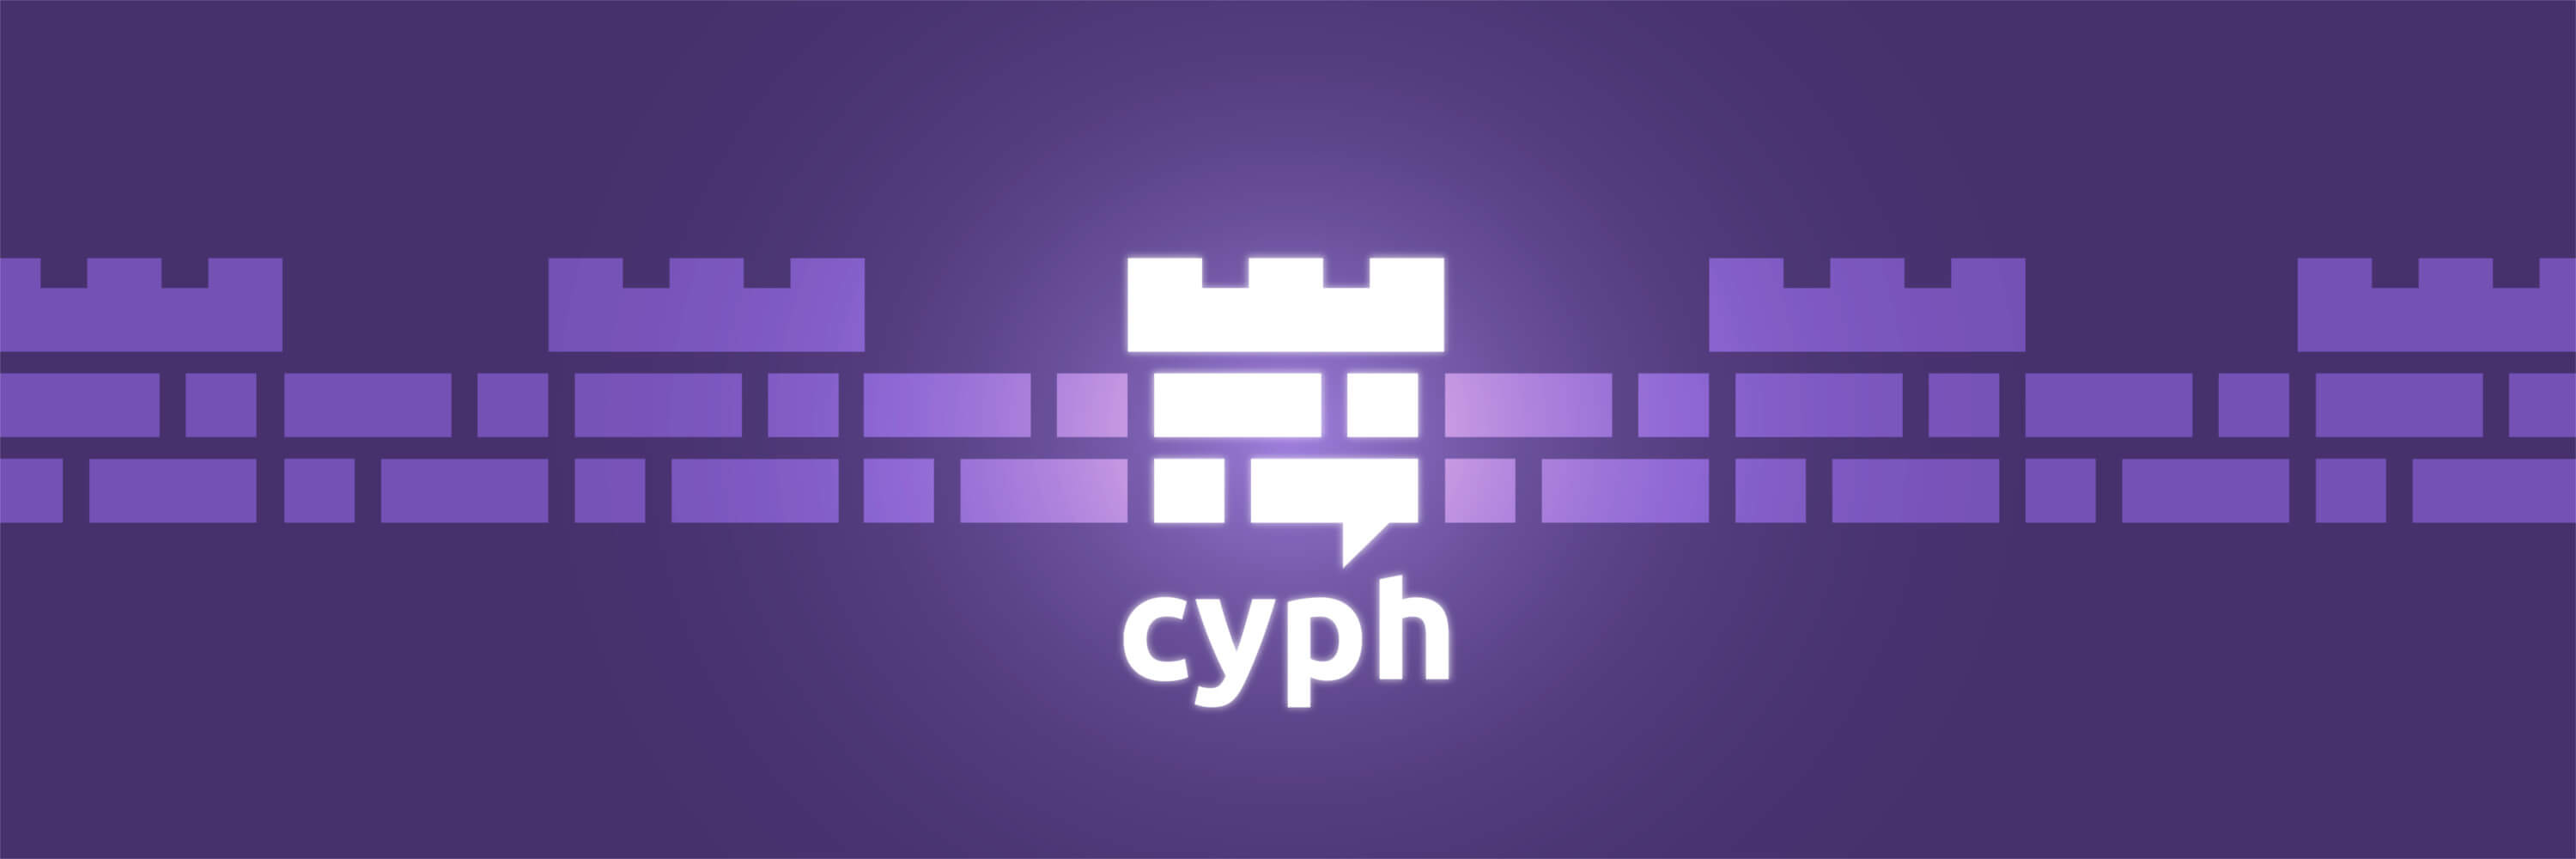 Why should you use Cyph?